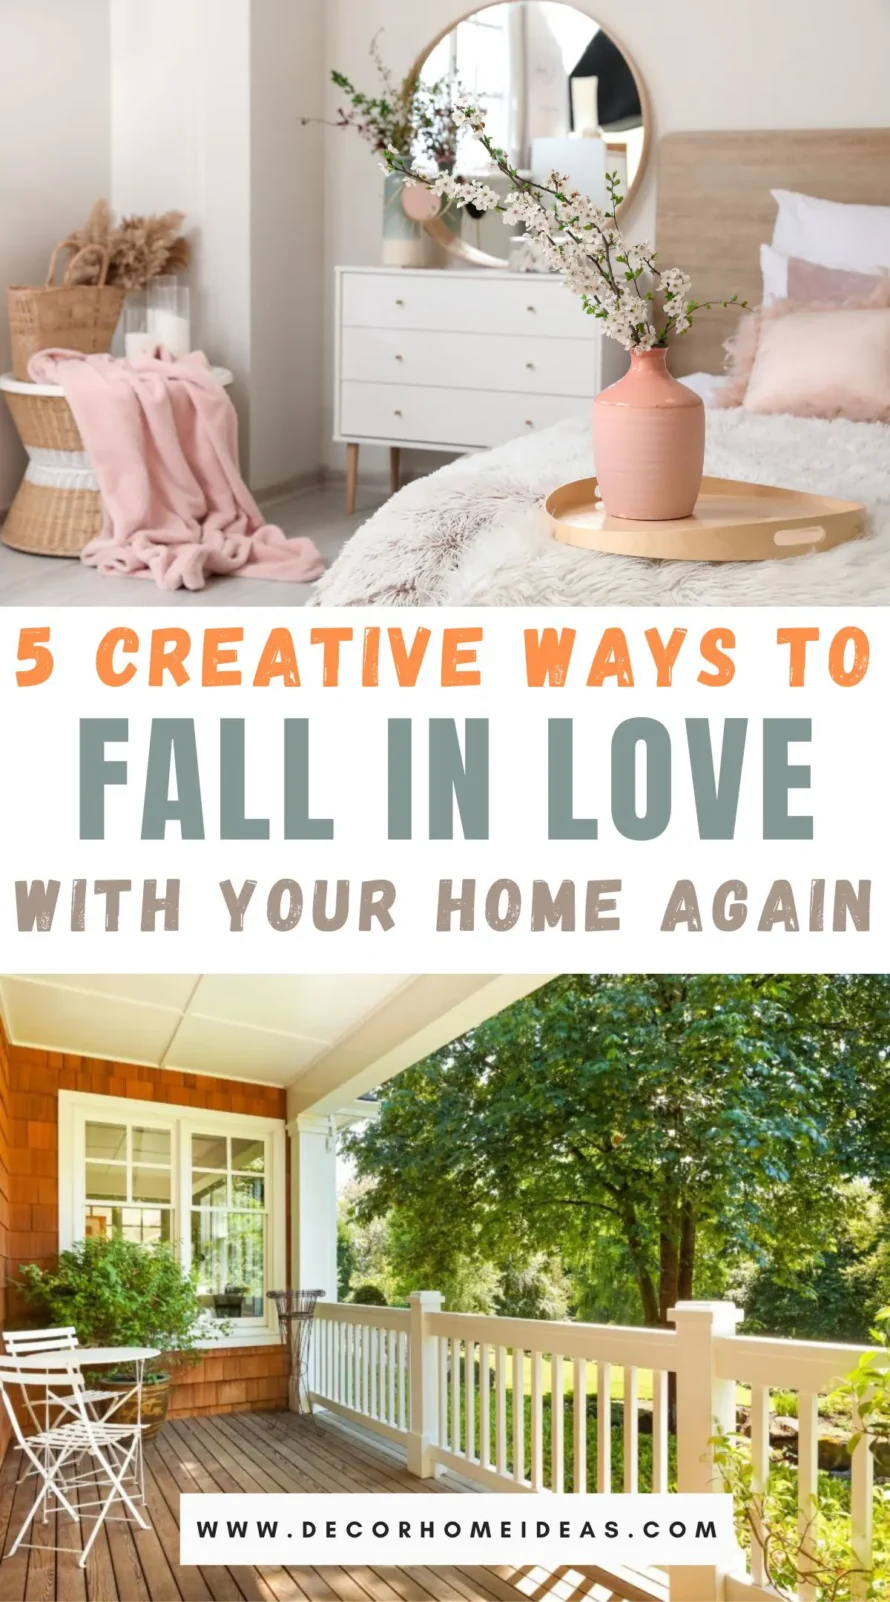 Rediscover the charm of your home with these 5 creative ways to fall in love with it all over again. From rearranging furniture to adding vibrant accents, these simple tips will rejuvenate your space and reignite your love for your home.